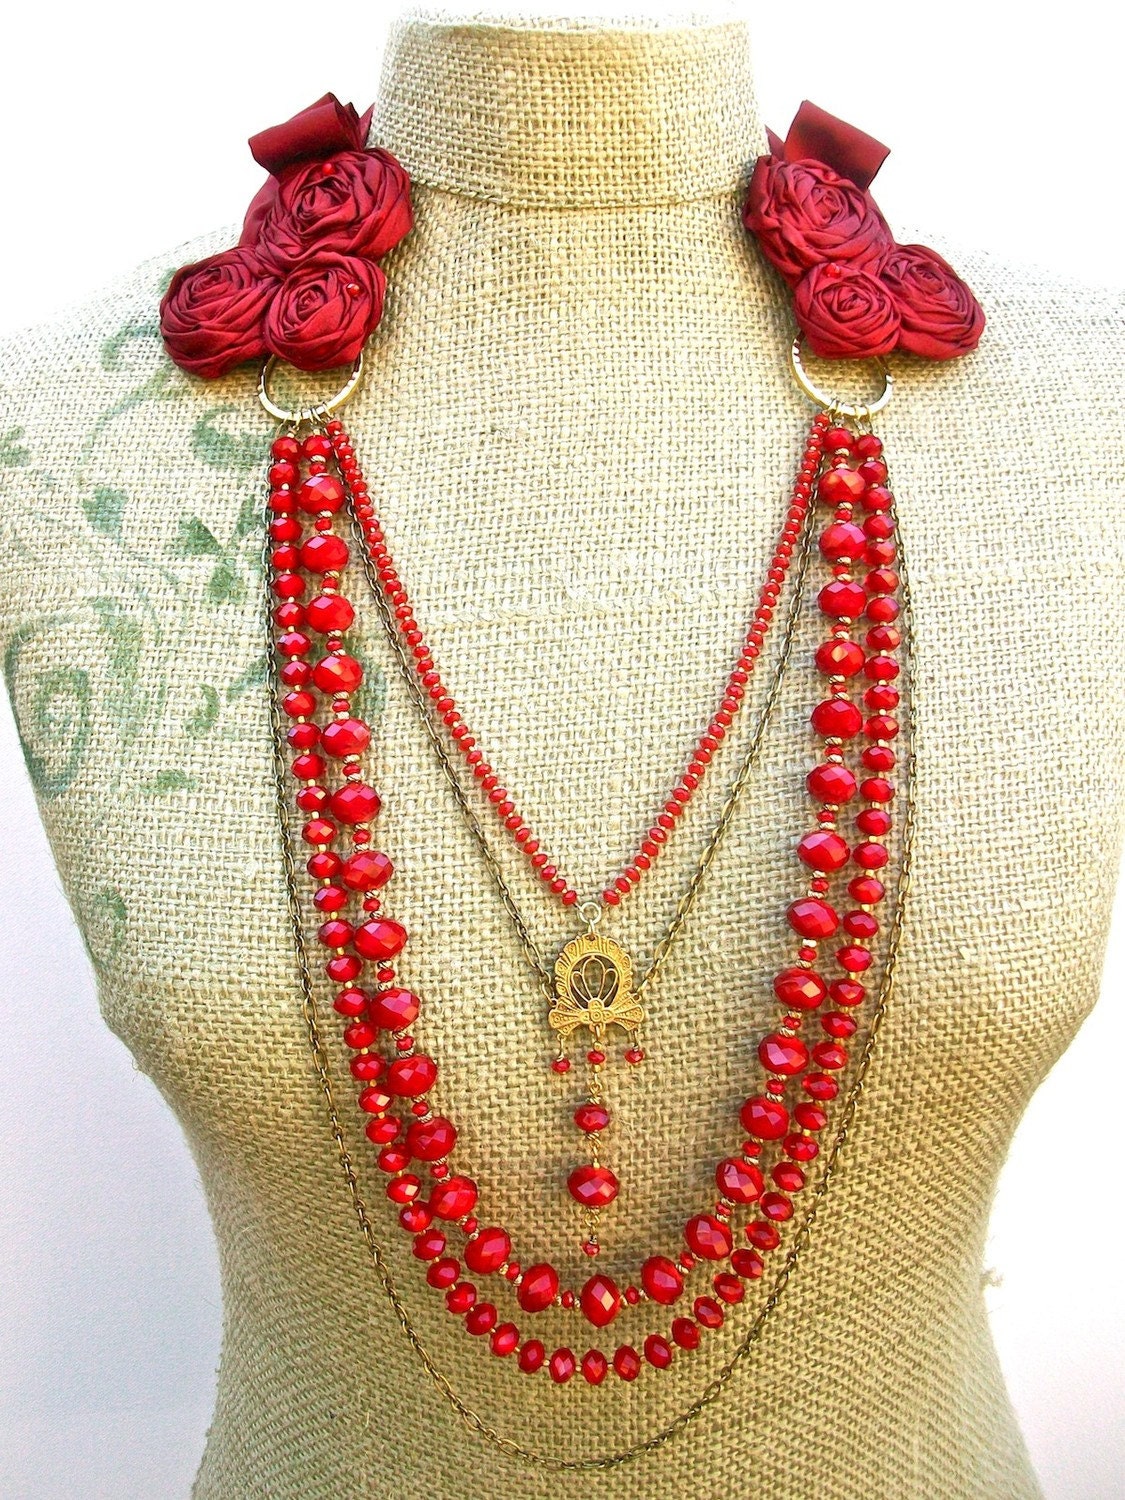 Carmen- tie necklace with Ruby Quartz, Vintage Filigree medallion, and Silk Rose Epaulettes and ties